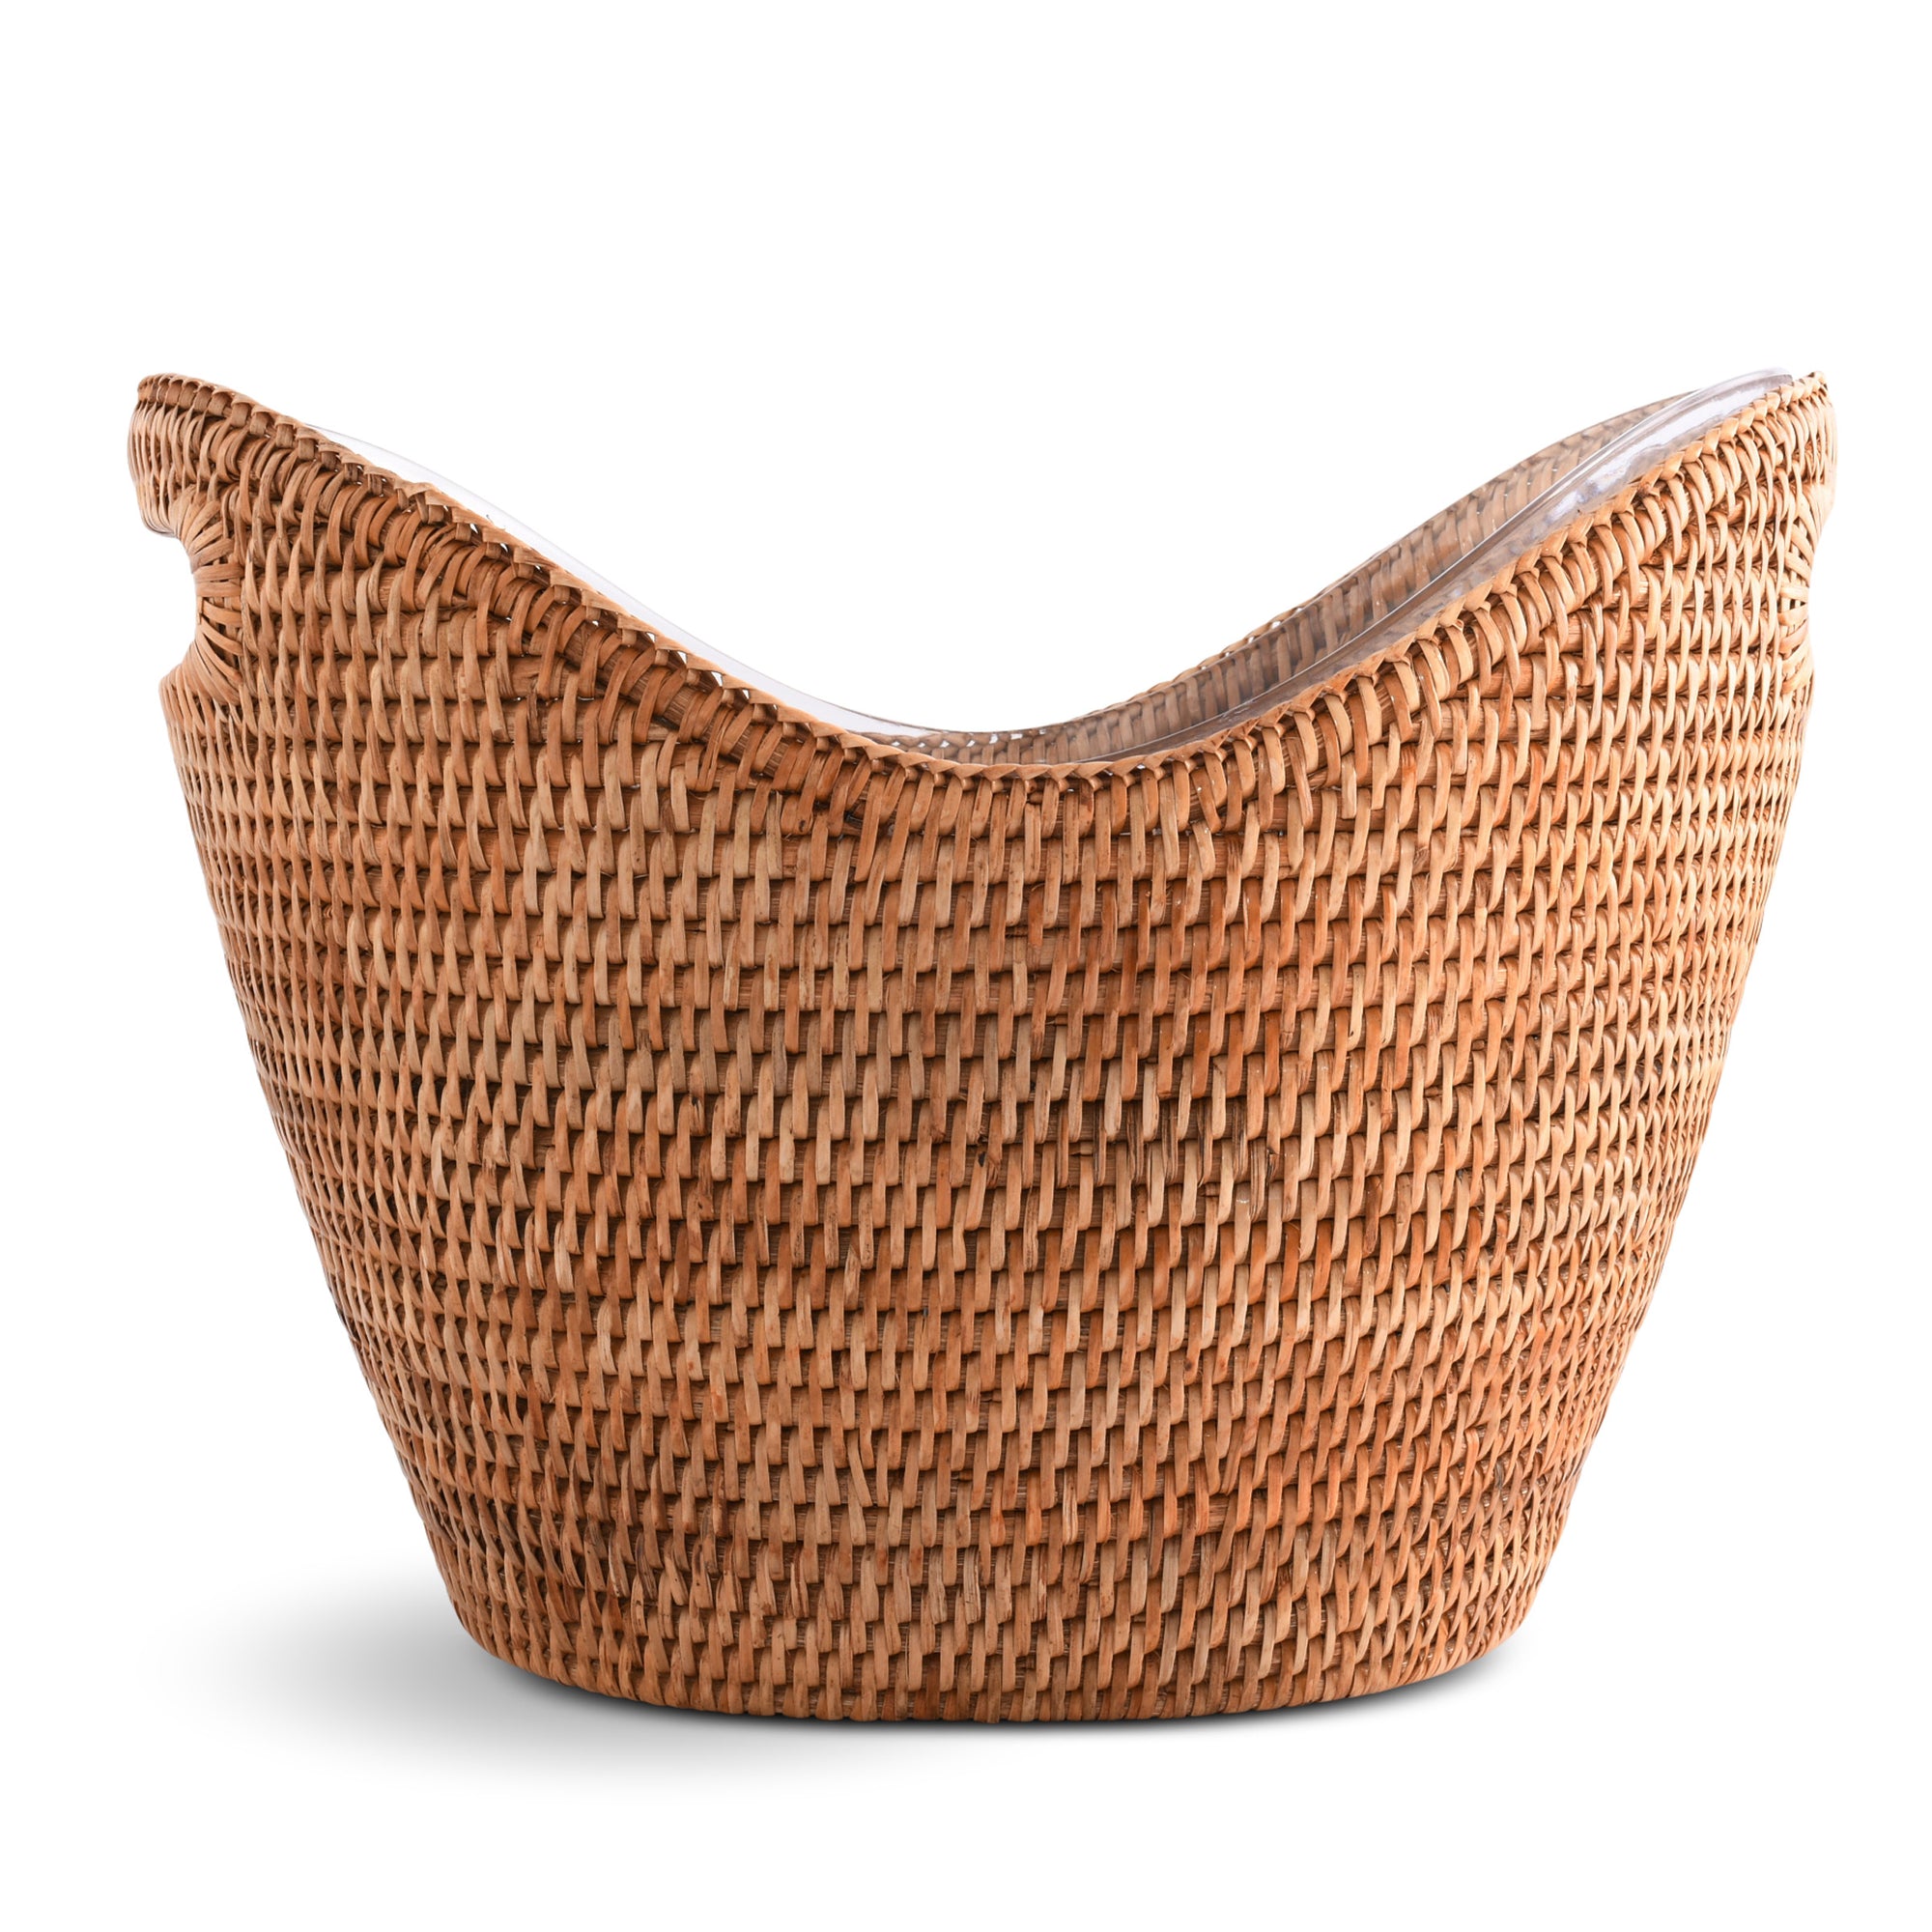 Vagabond House Hand Woven Wicker Rattan Champagne / Ice Tub Product Image